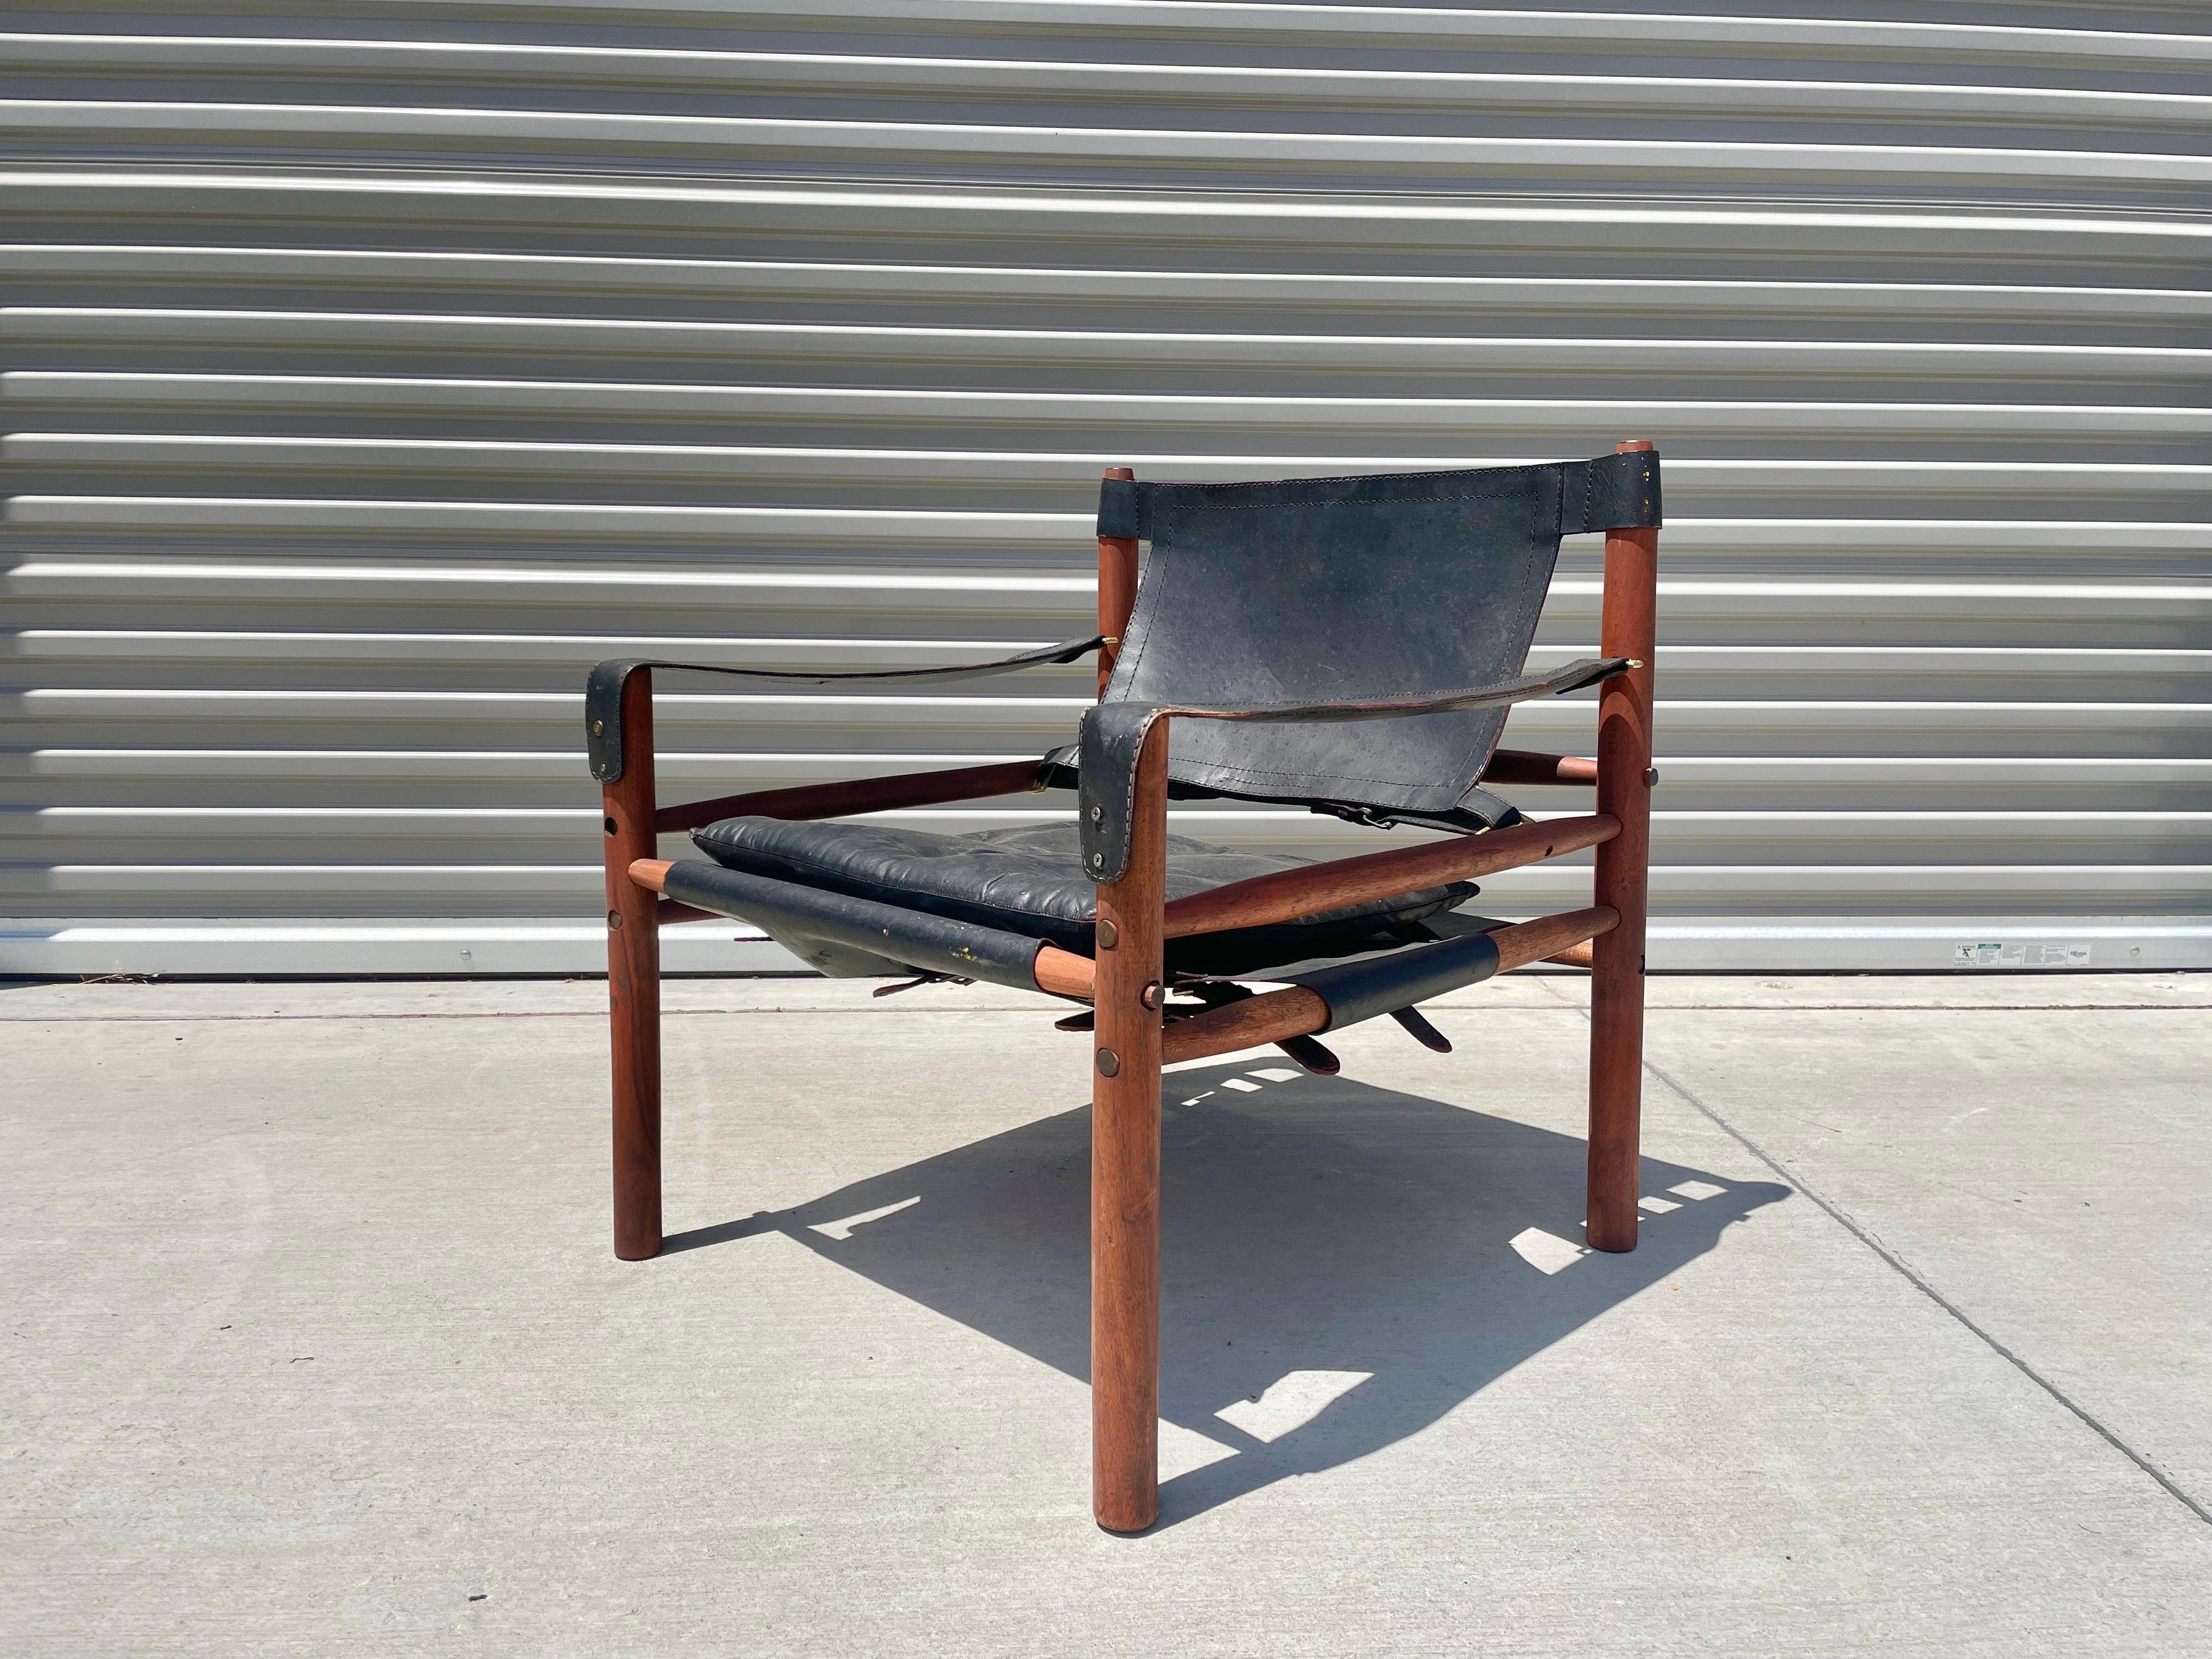 Stunning midcentury leather sirocco safari chair by Arne Norell. This fantastic chair is just one of a kind, from its elegant wood frame to its leather upholstery design. This safari chair is the chair that everyone wants in their home. But this